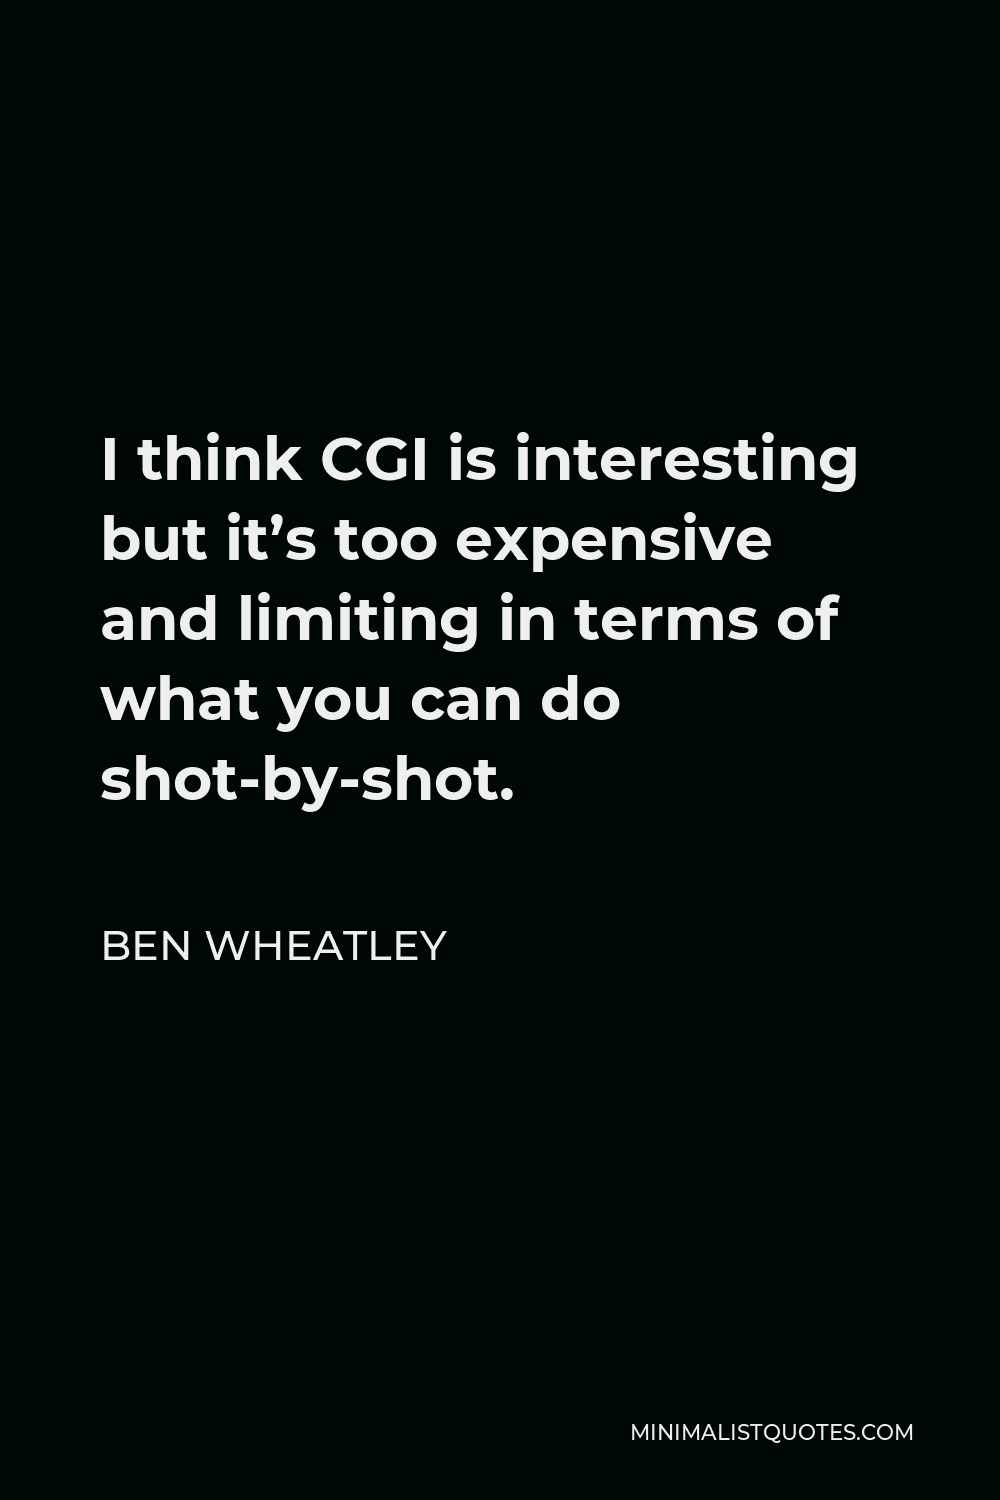 Ben Wheatley Quote - I think CGI is interesting but it’s too expensive and limiting in terms of what you can do shot-by-shot.